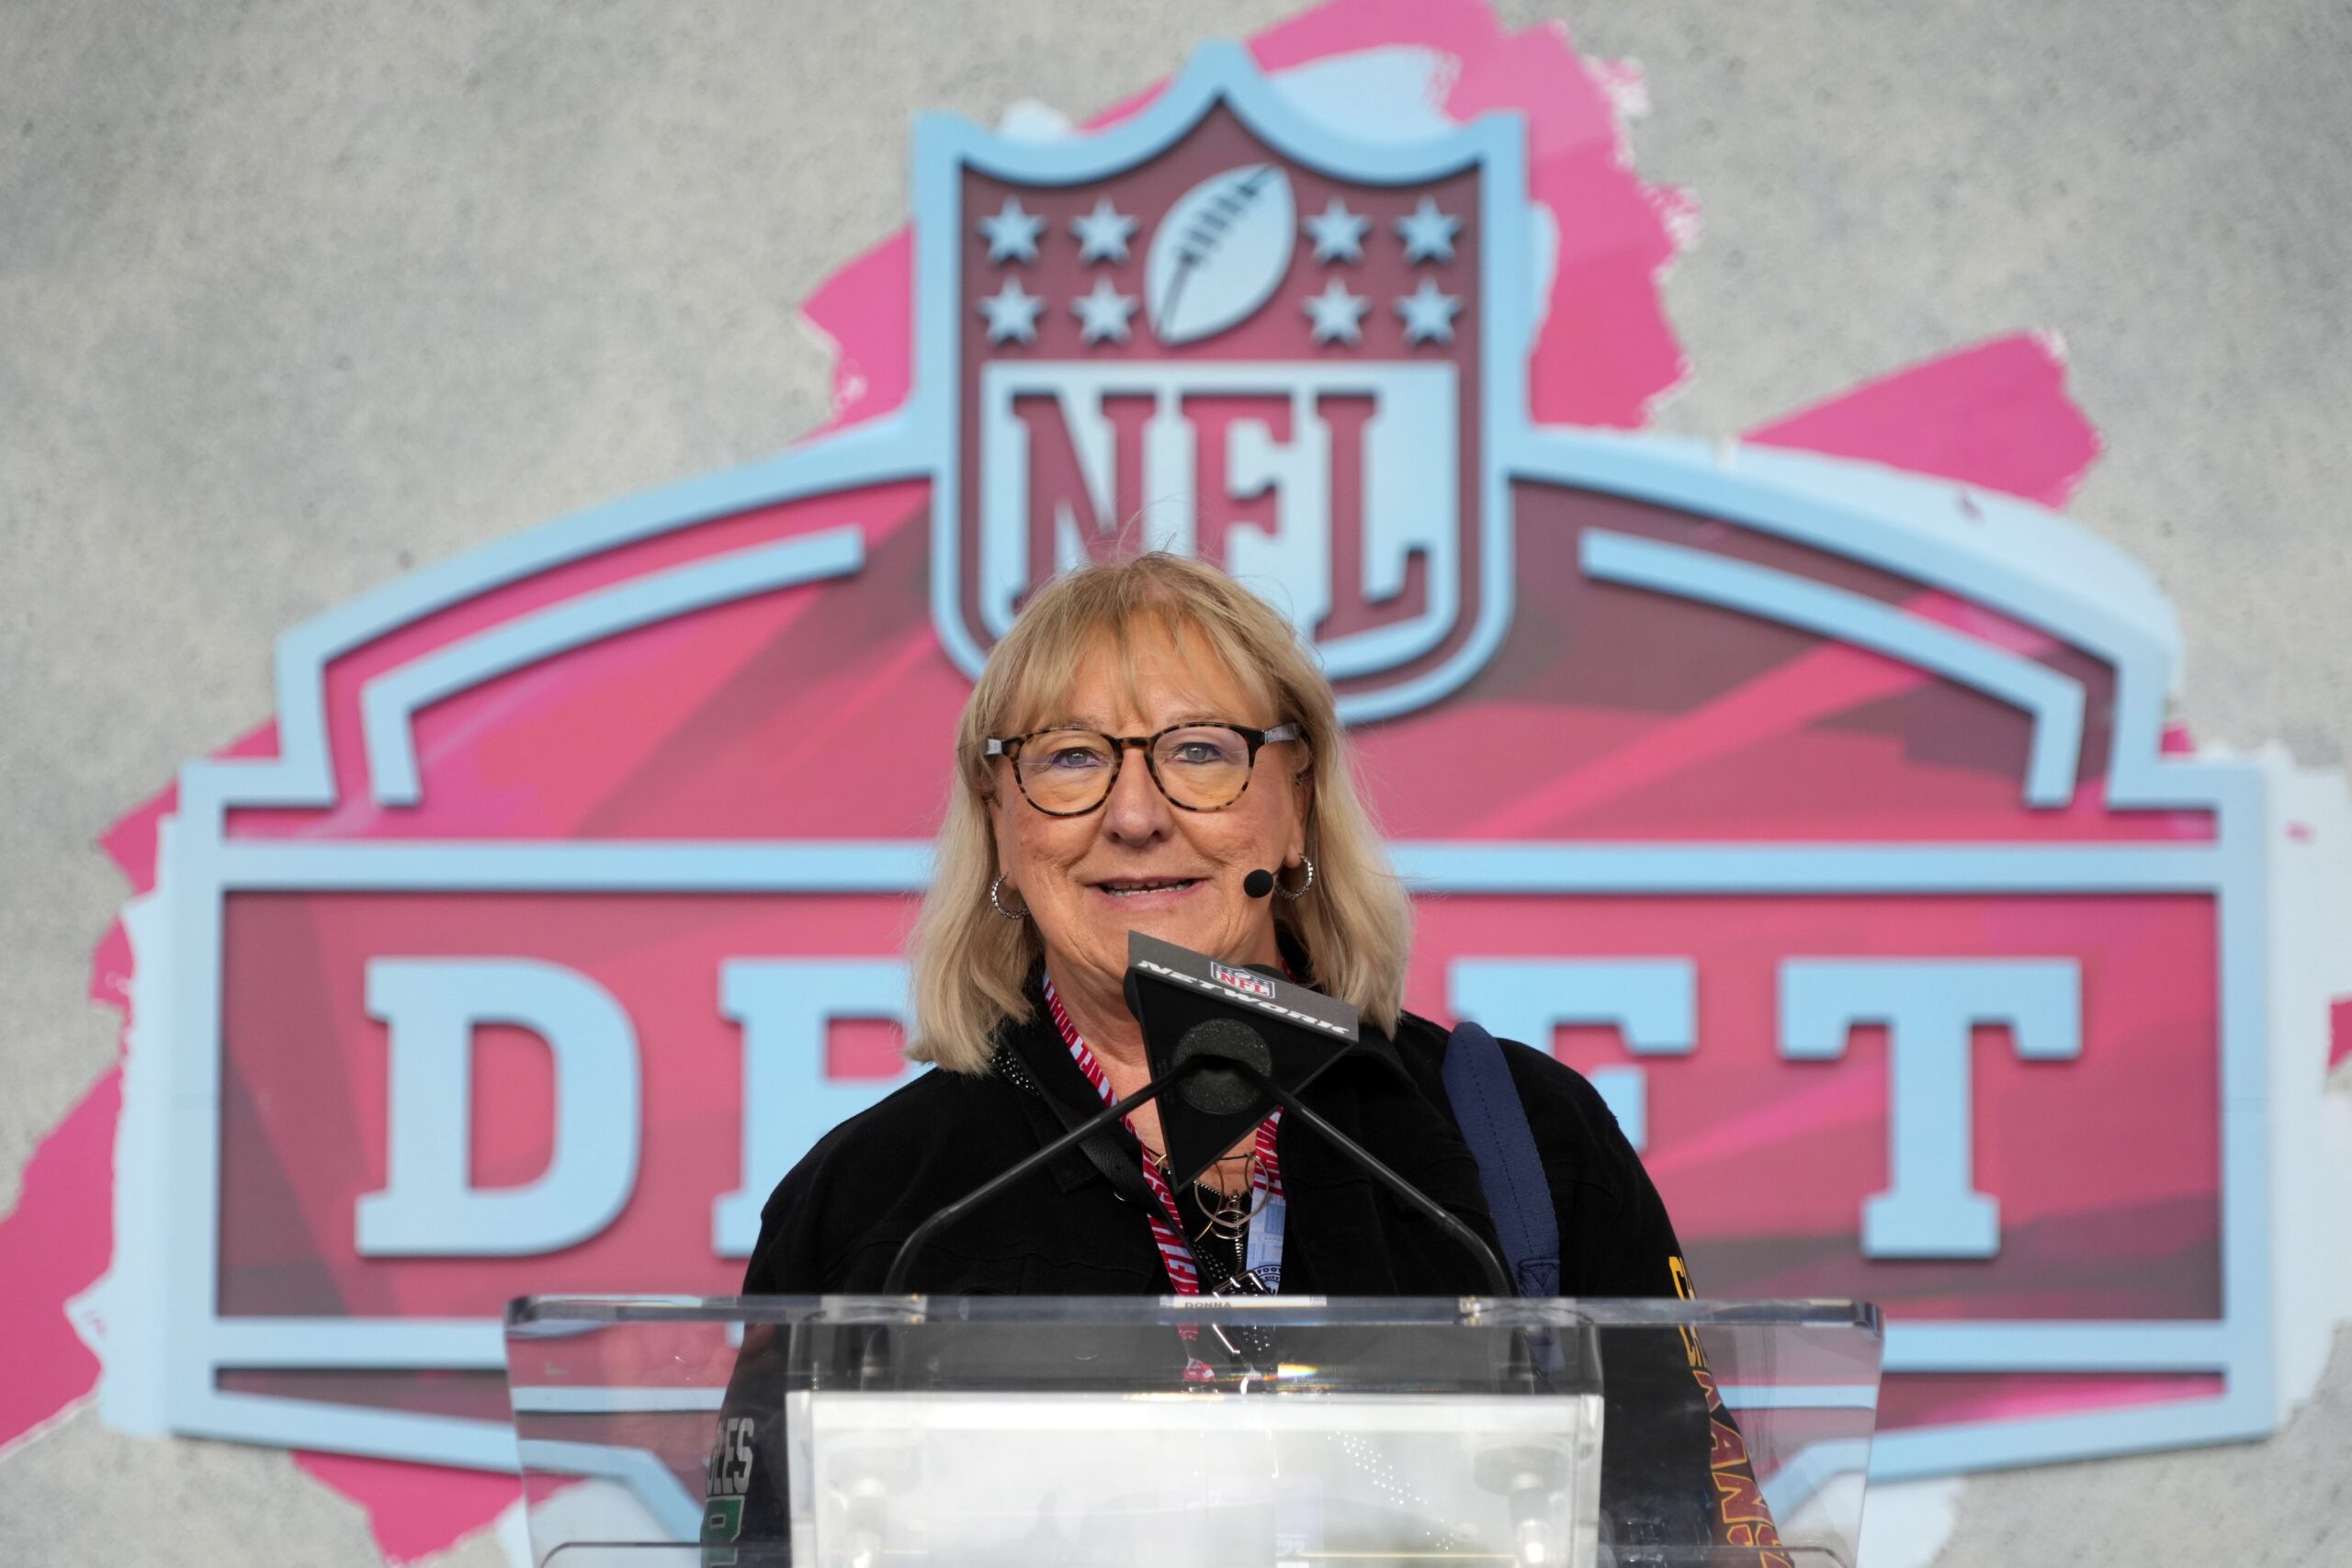 2023 NFL Draft: Who Are the Special Announcers for Rounds 2 and 3 Tonight?